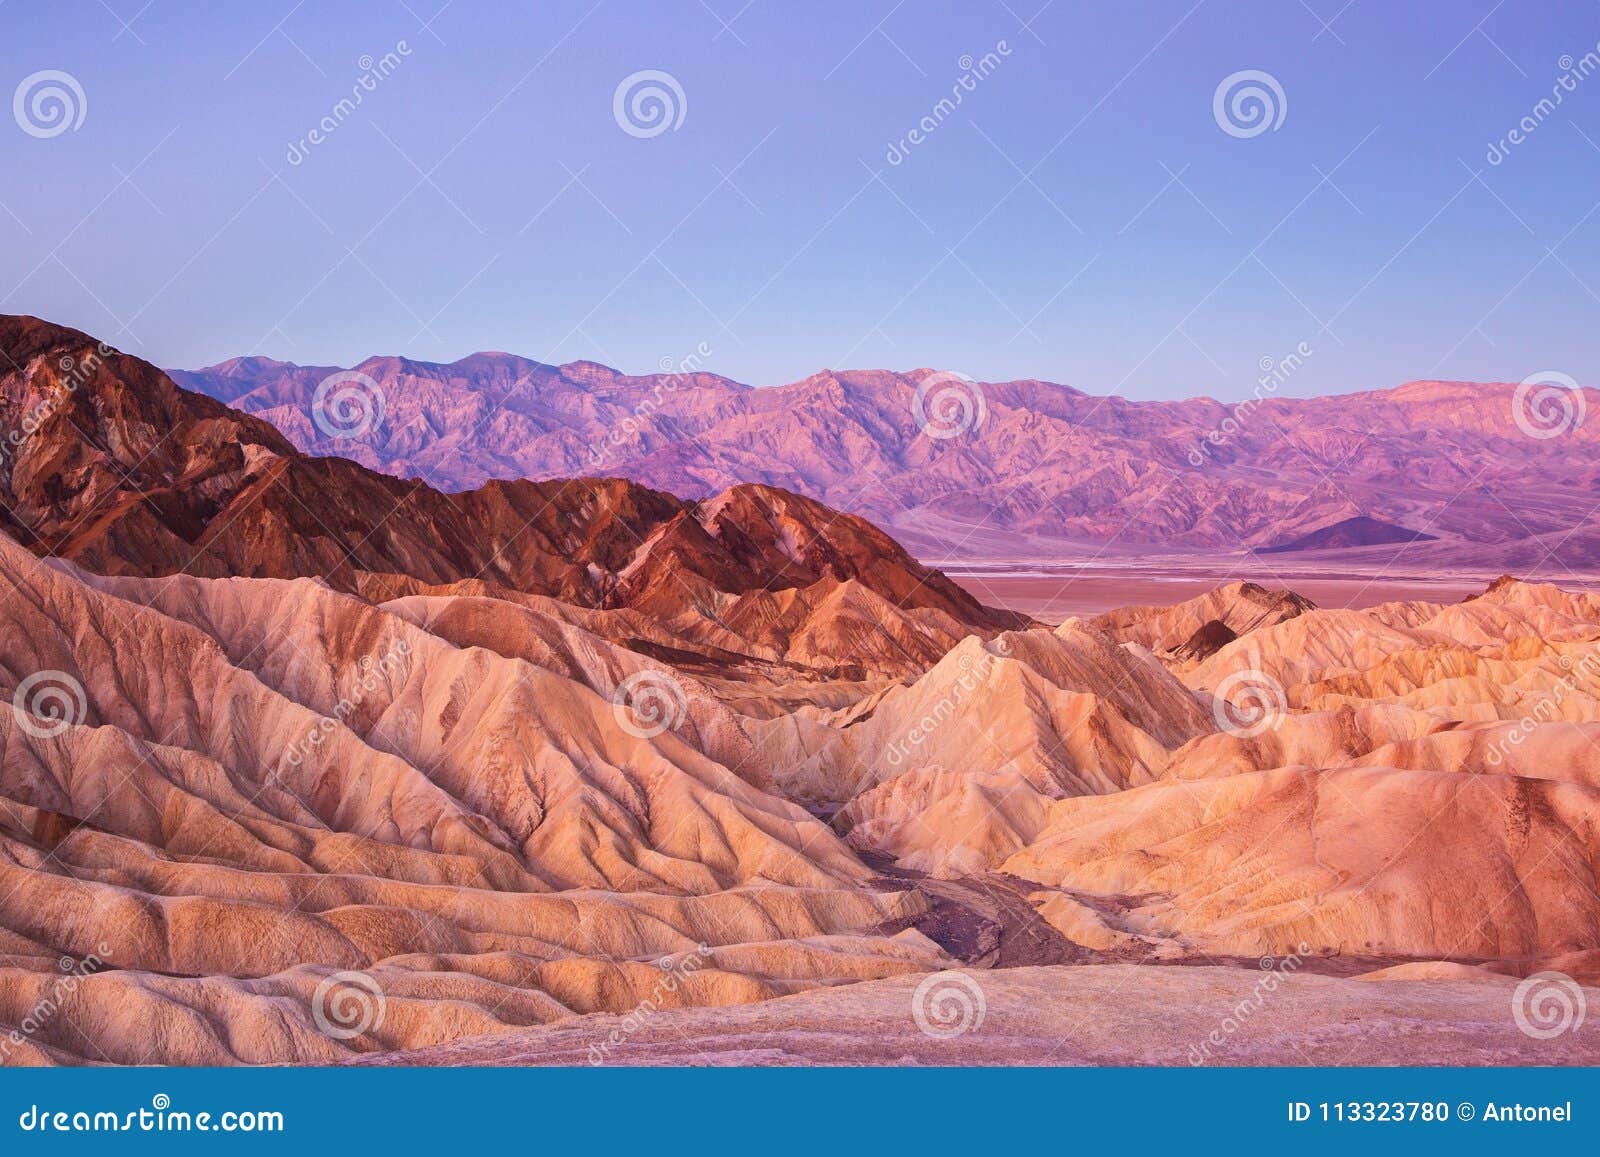 scenic view from zabriskie point, showing convolutions, color contrasts, and texture in the eroded rock at dawn, amargosa range,